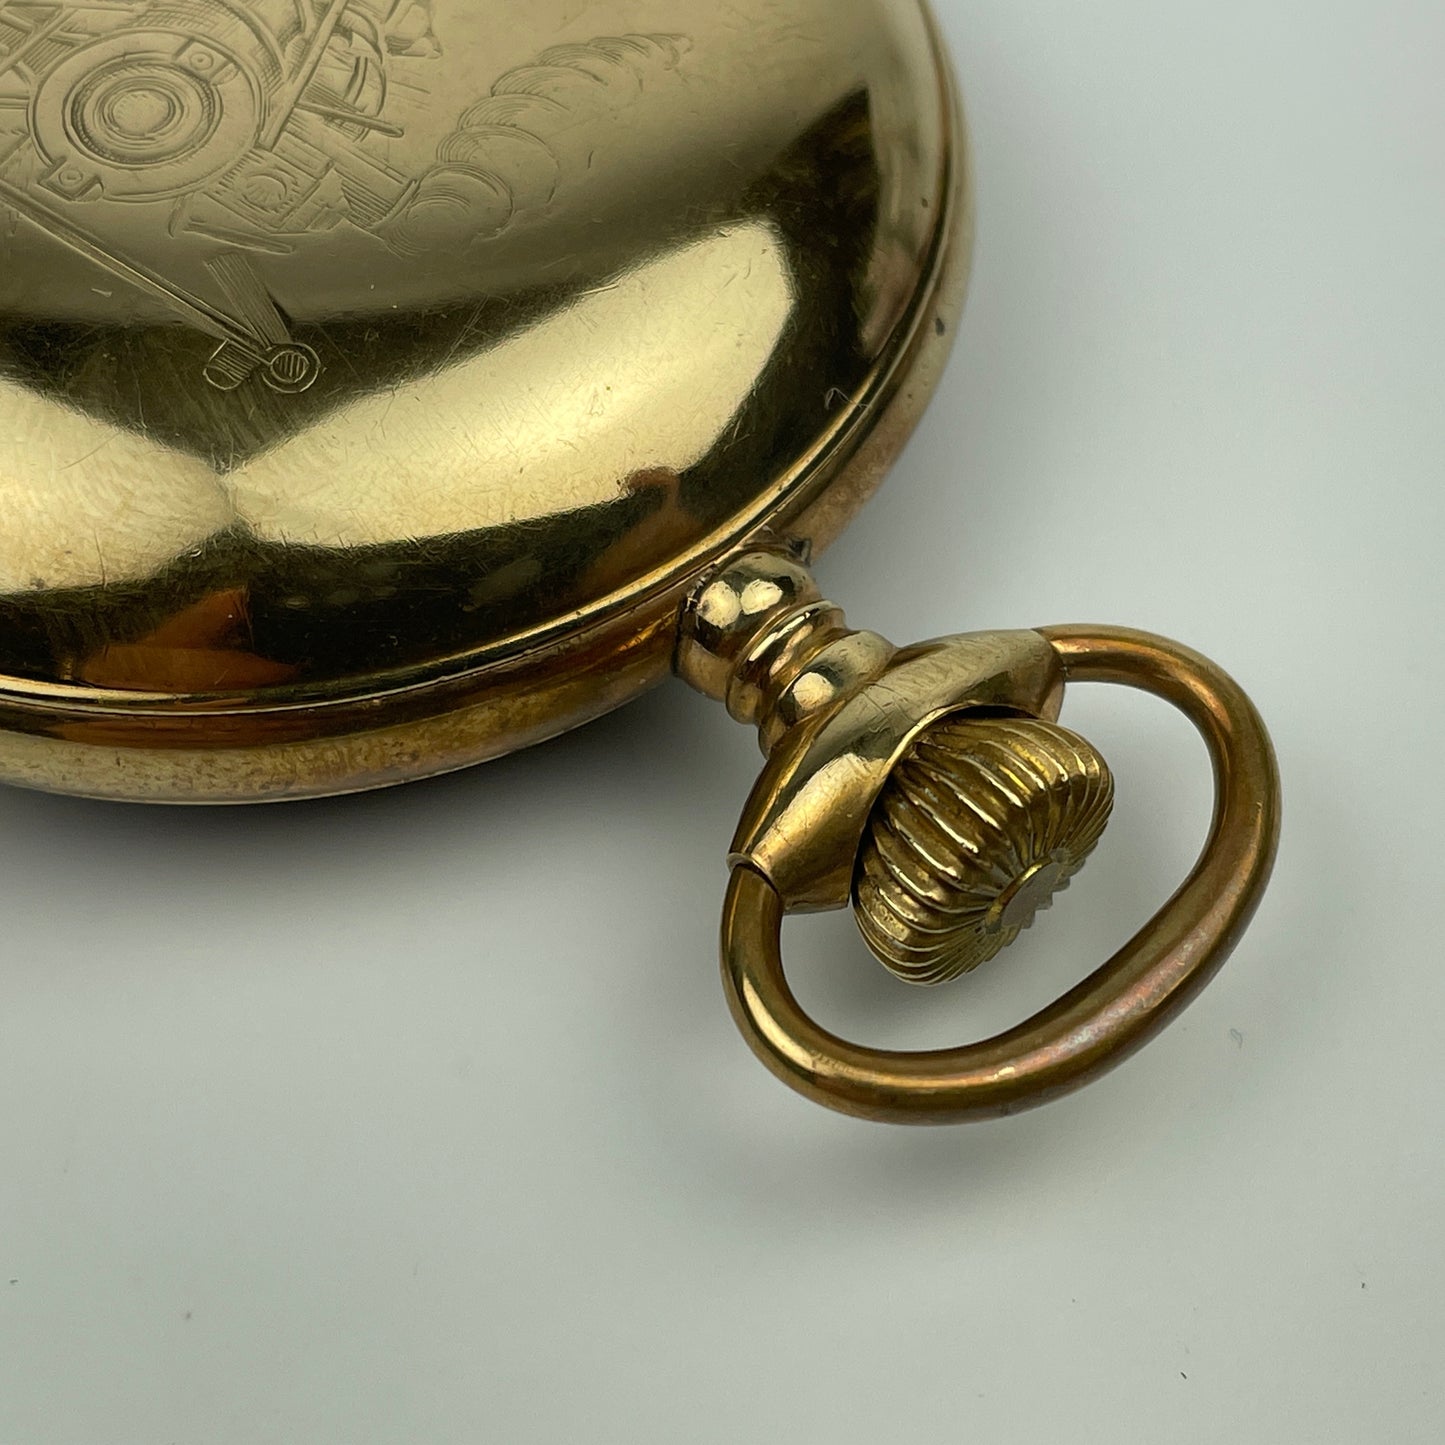 Lot 66- American 18 Size Screw Cover Pocket Watch Case